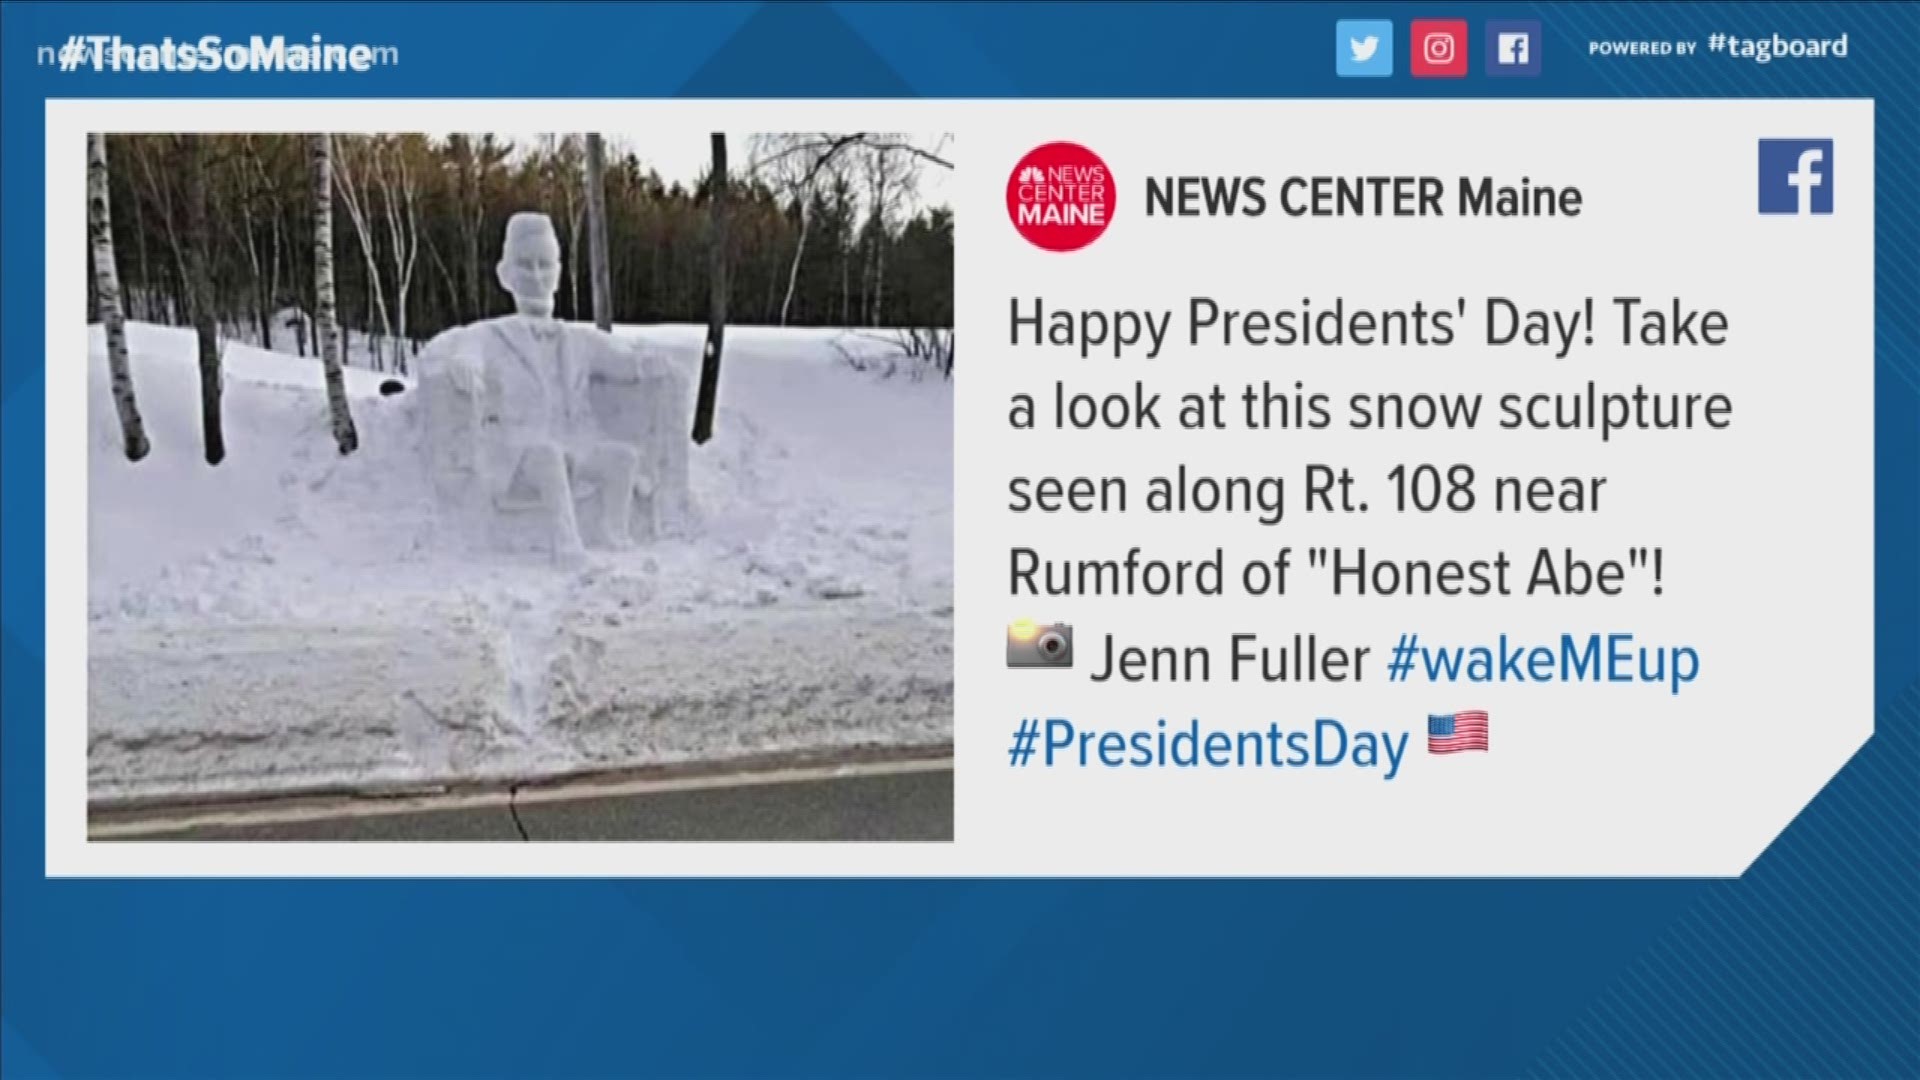 Some Mainers spent their Monday off creating presidential artwork in the snow!